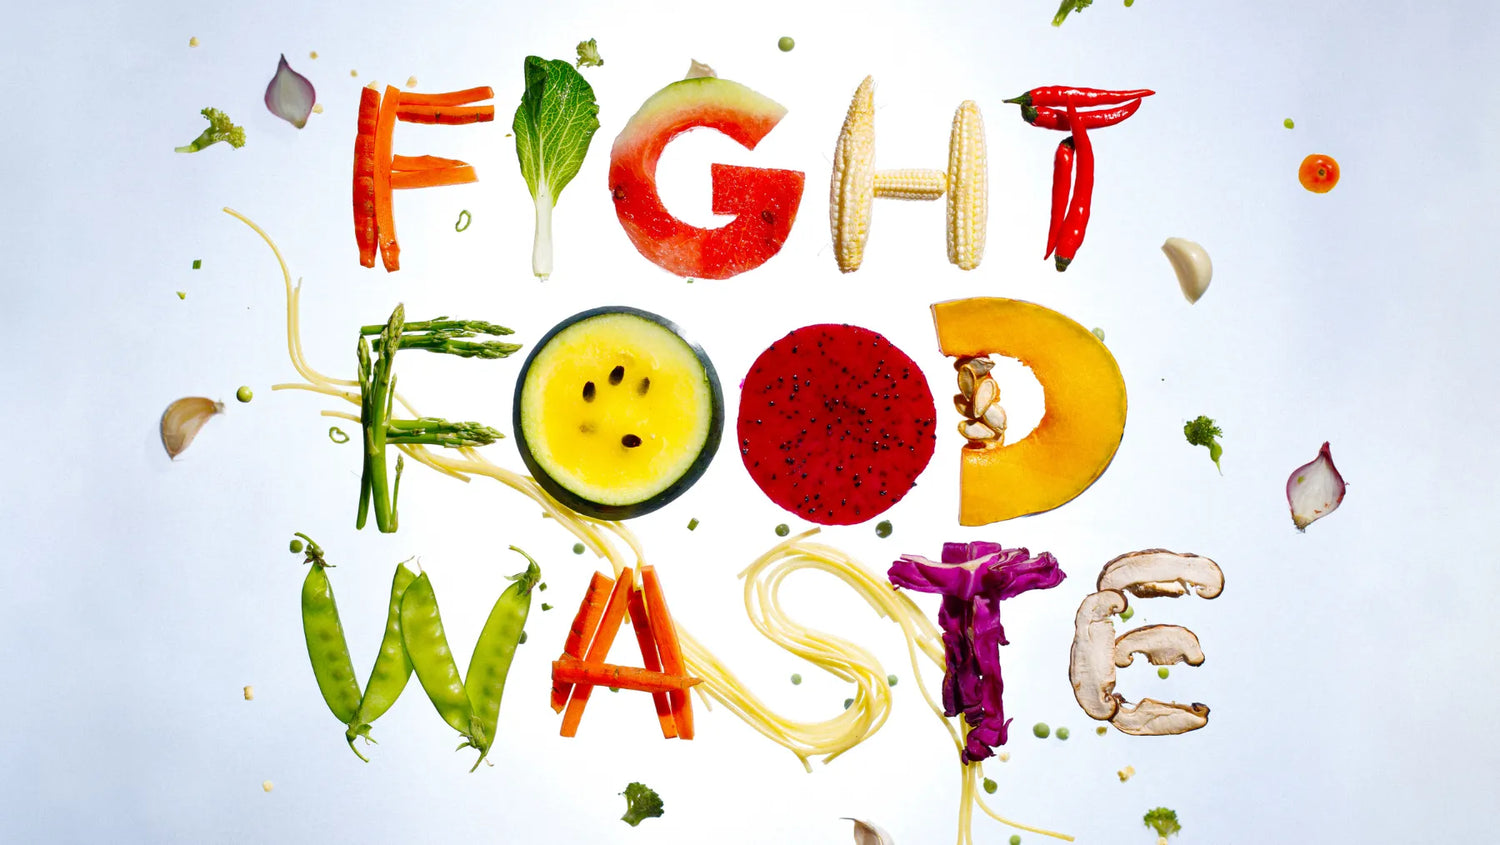 fight food waste spelt with food